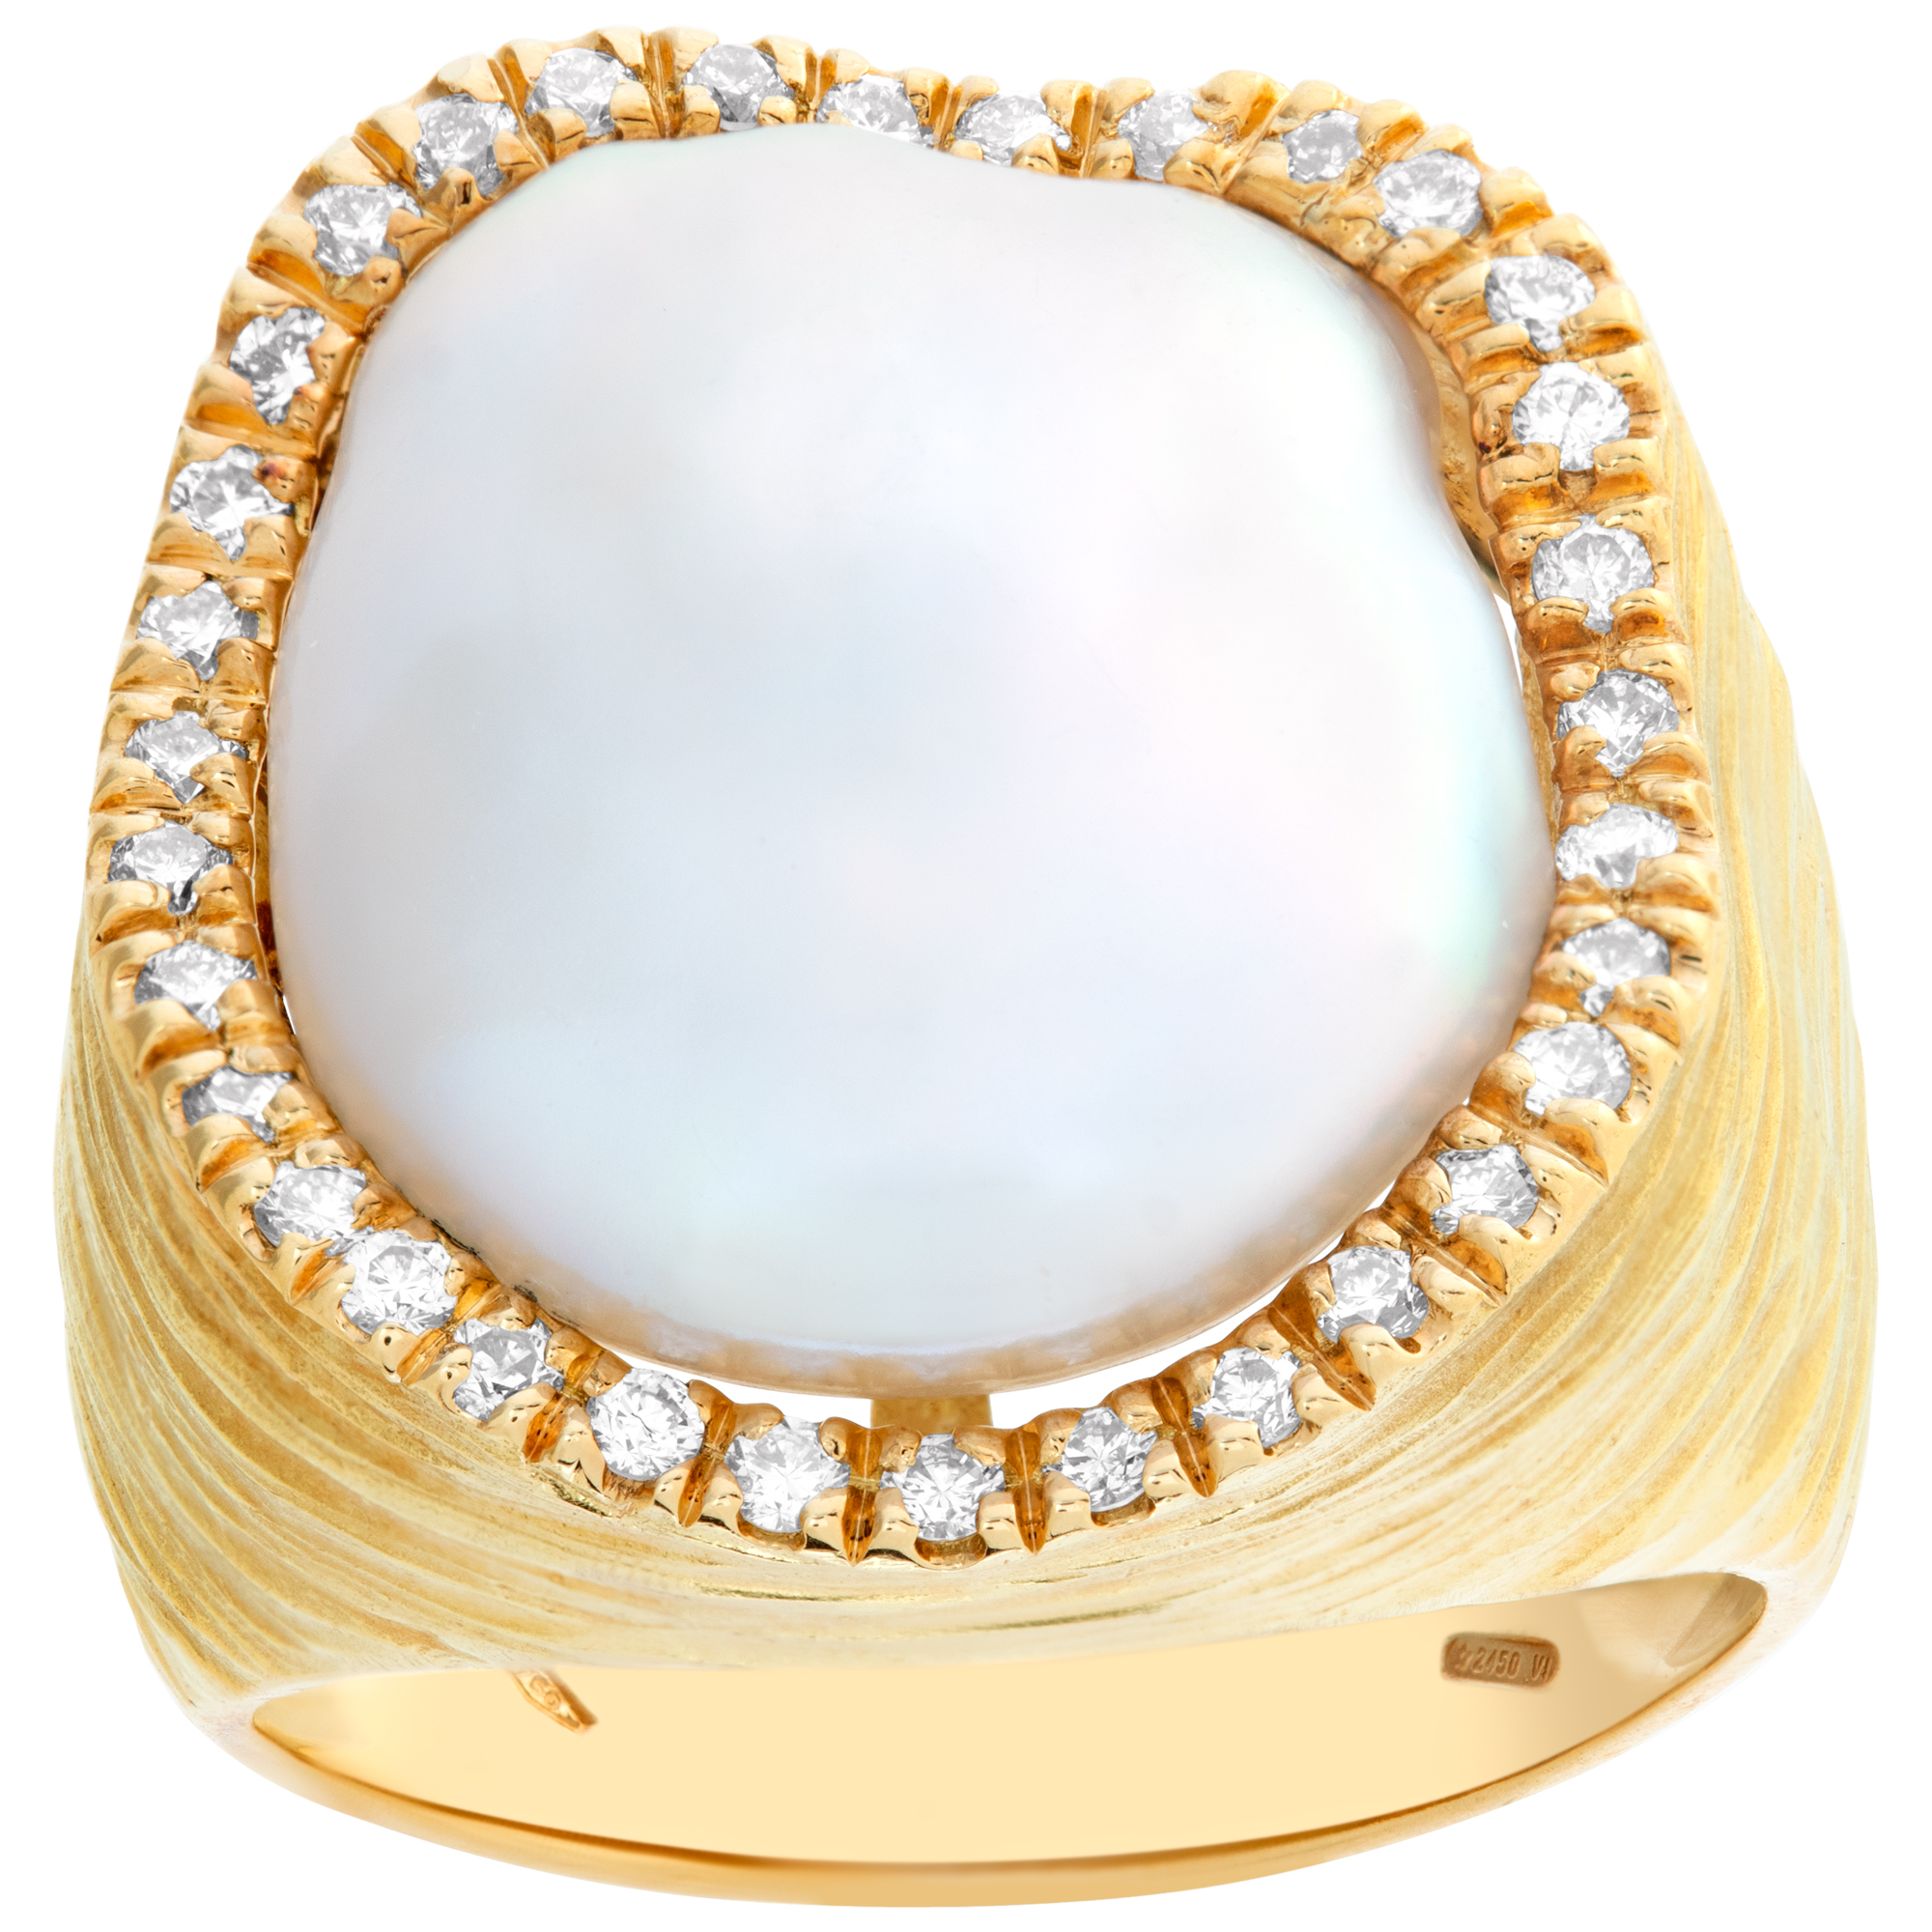 Baroque 18mm pearl ring surrounded by 0.50 ctarat in diamonds in 18k matte gold.